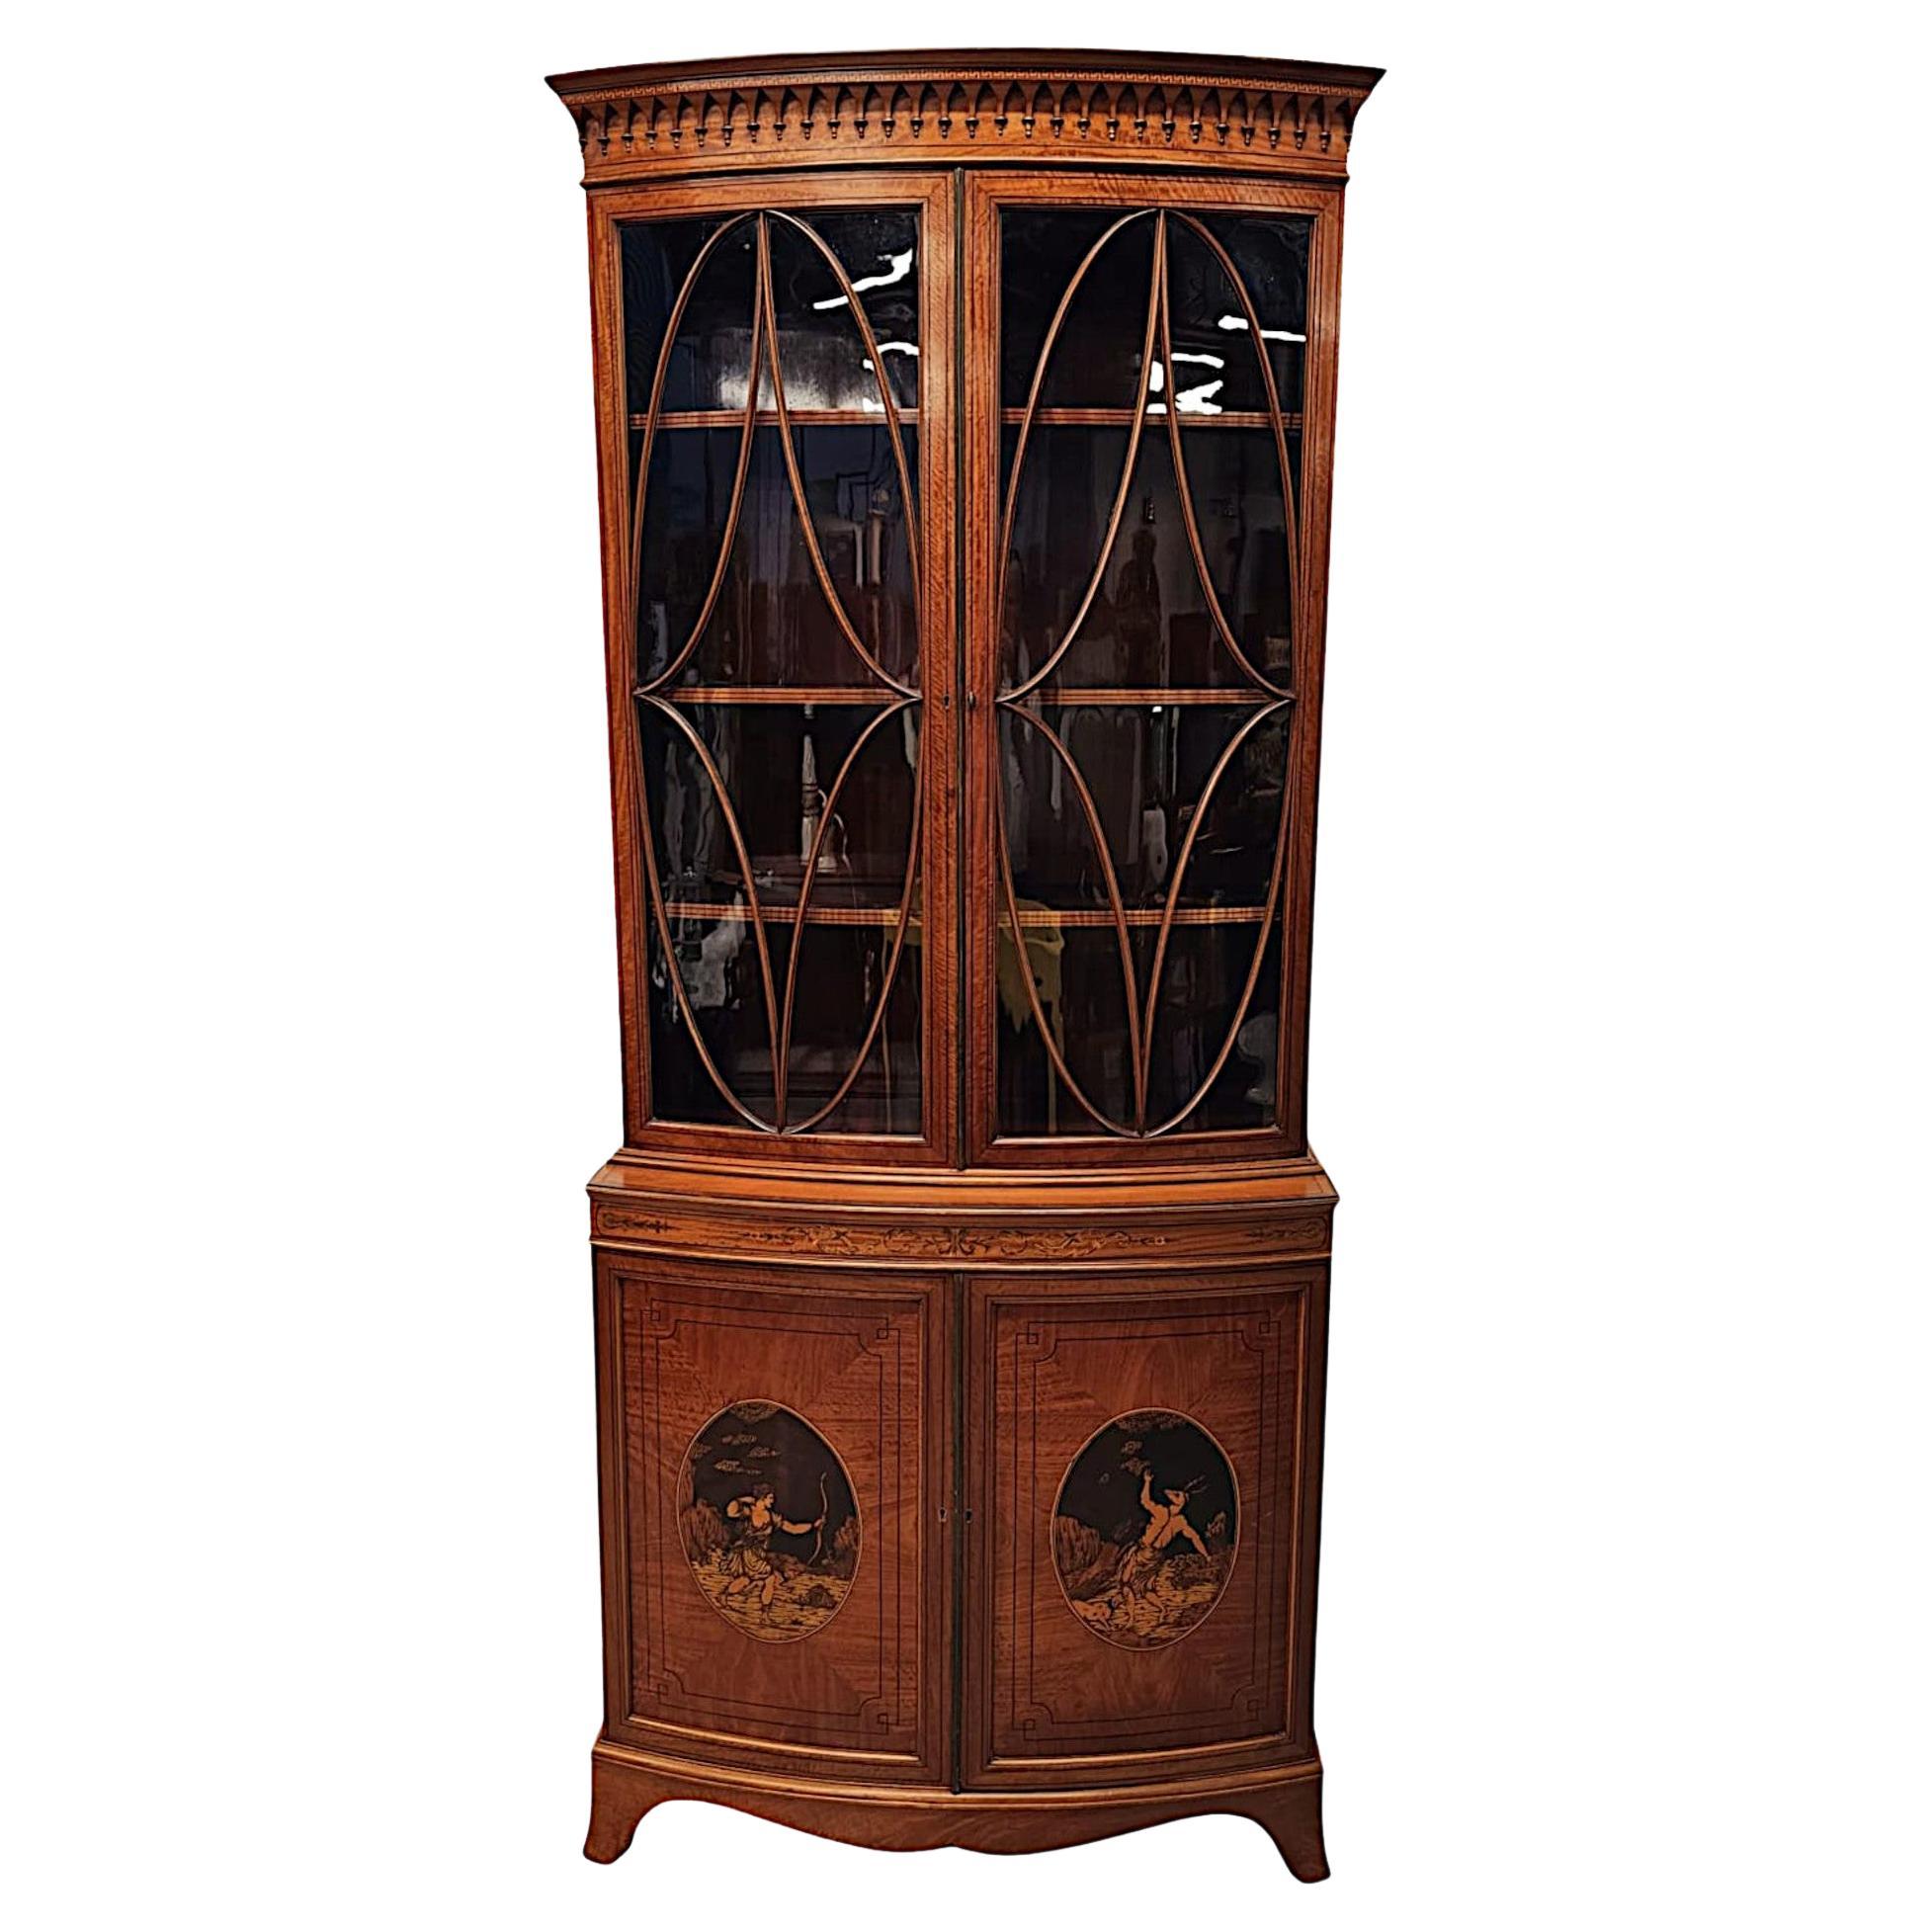 A  Fine Edwardian Marquetry Inlaid Bowfronted Bookcase afterf Edward and Roberts For Sale